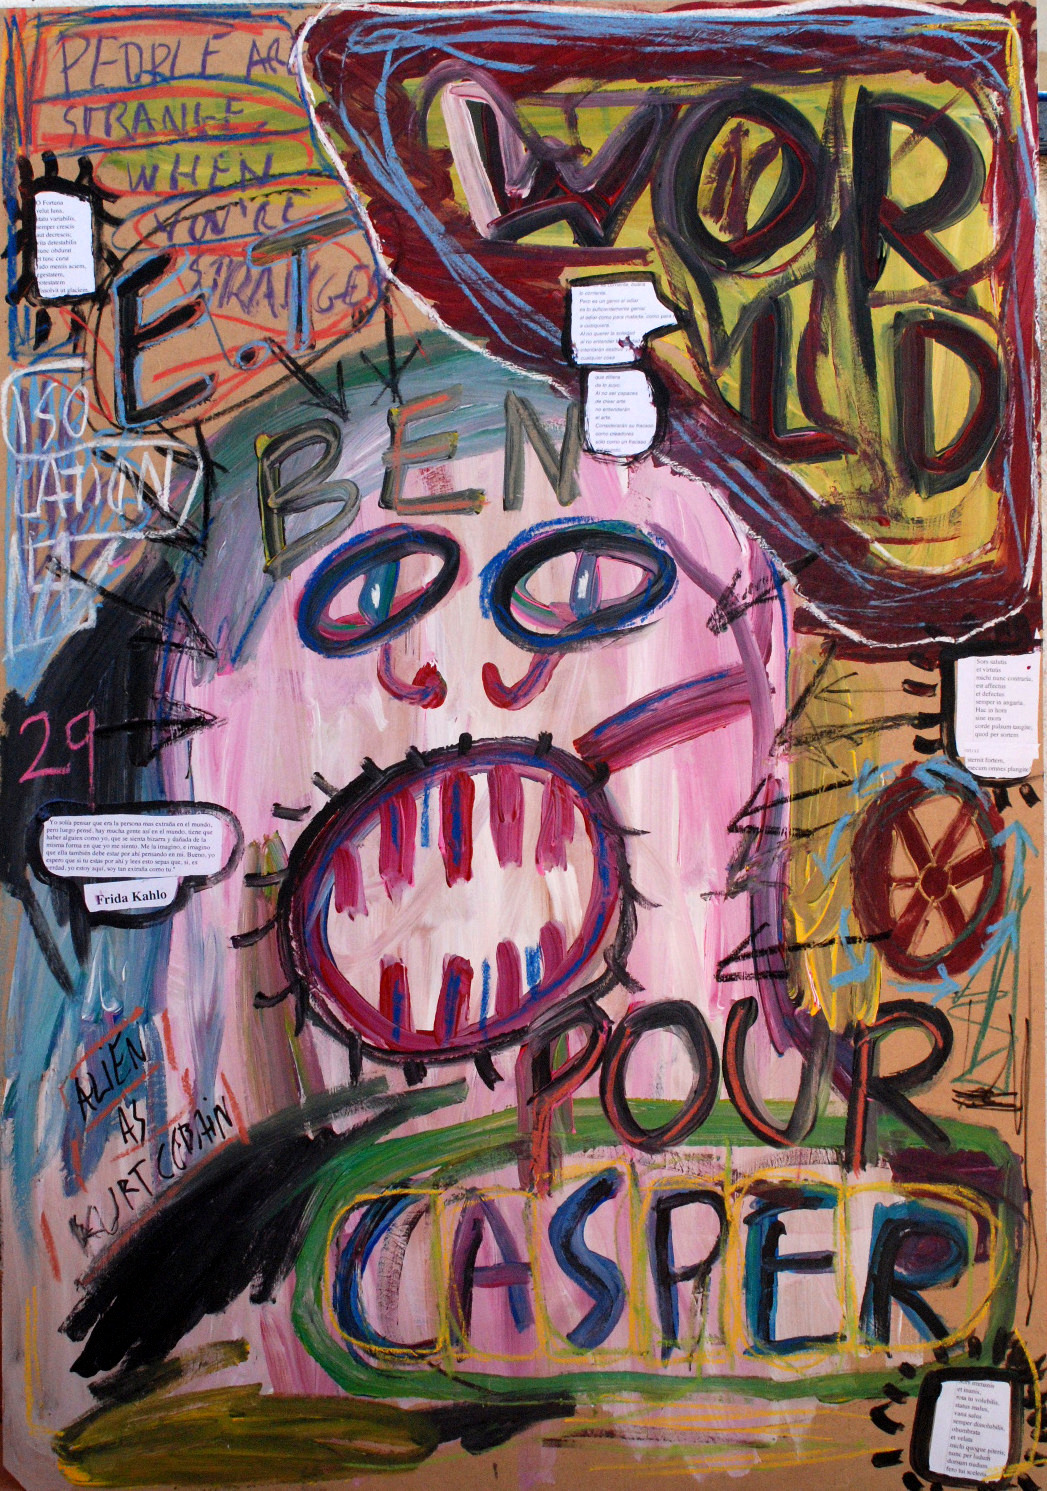    “No title” , 2012   Acrylic paint, pastel and mixed media on wood, 50 x 110 cm 